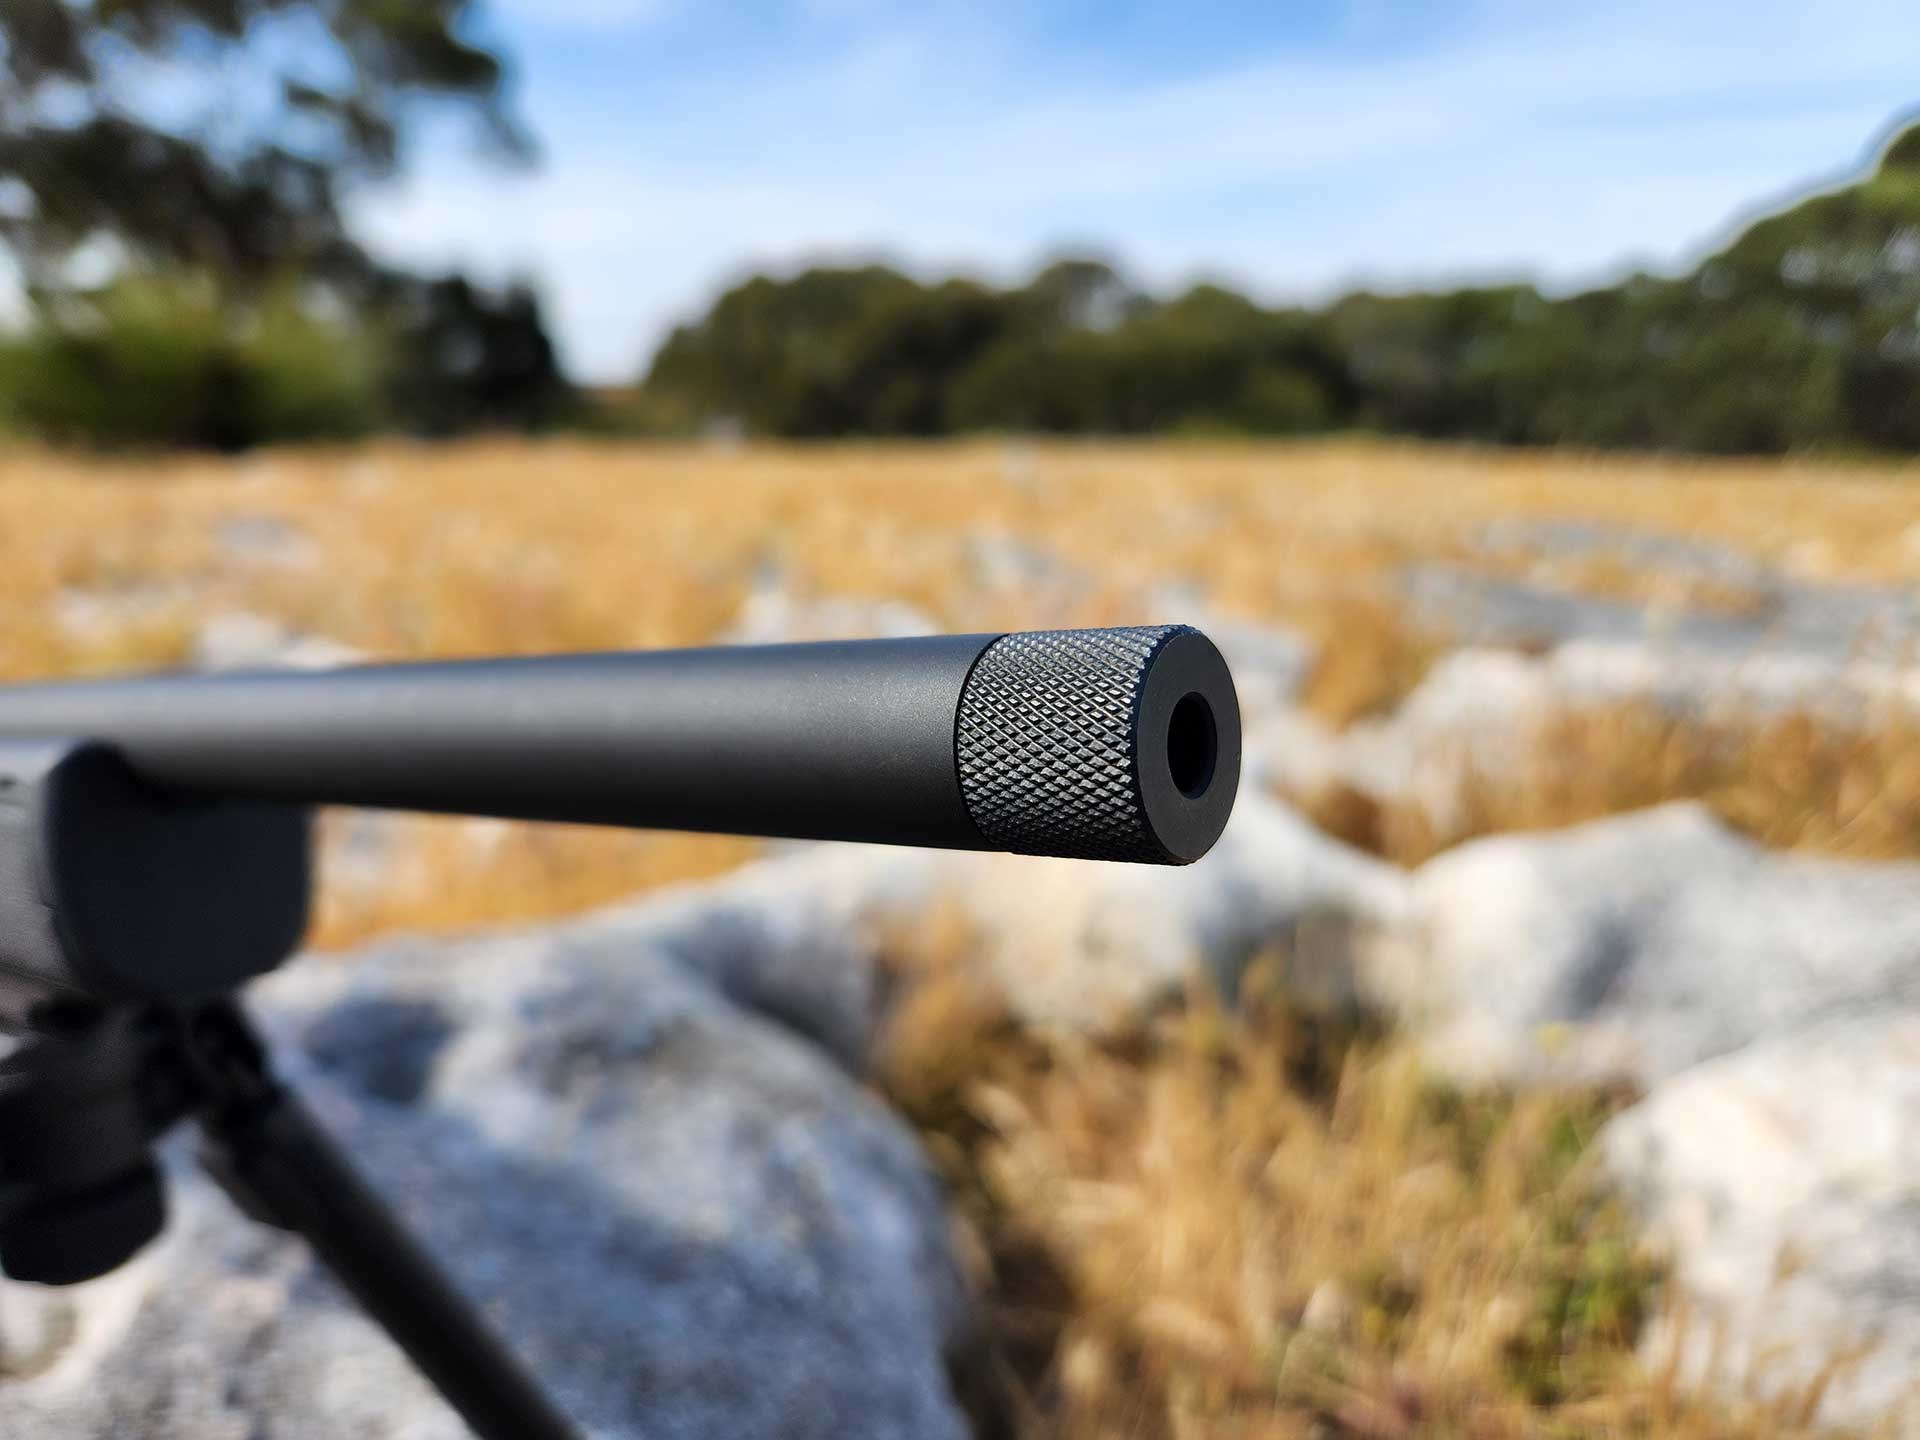 Knurled end cap on the threaded muzzle of the Hammerli Arms Force B1 rifle.